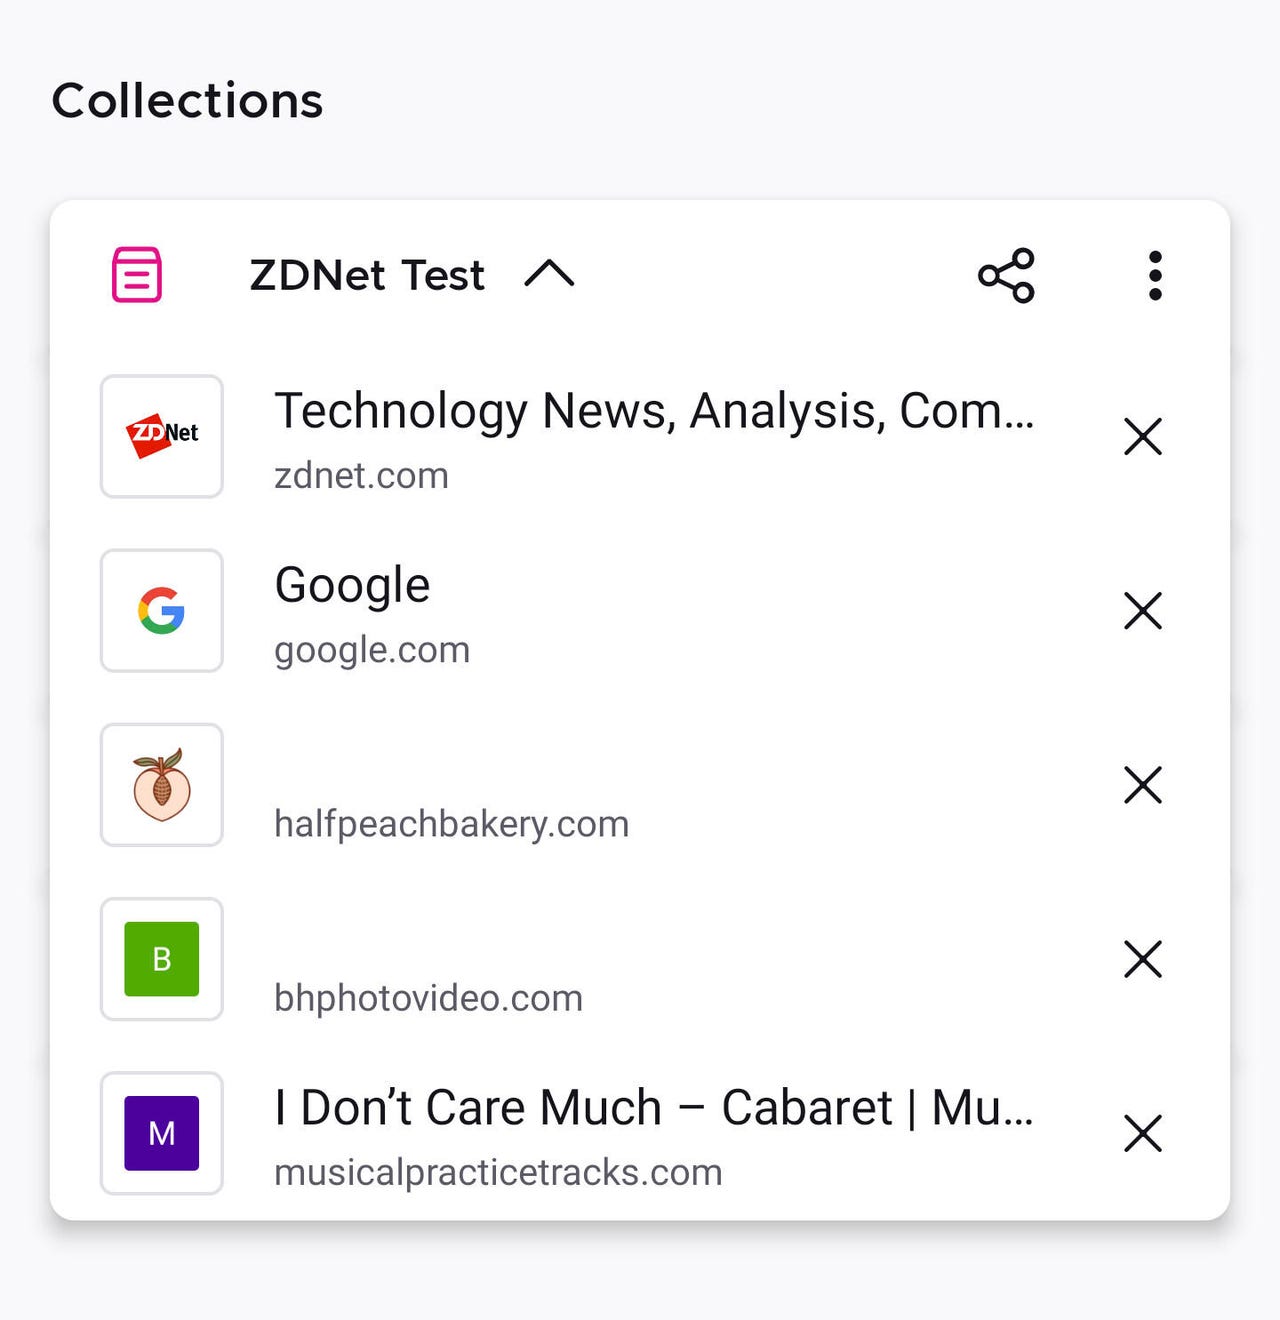 15 Firefox Collections To Suit Your Online Browsing Needs - Hongkiat